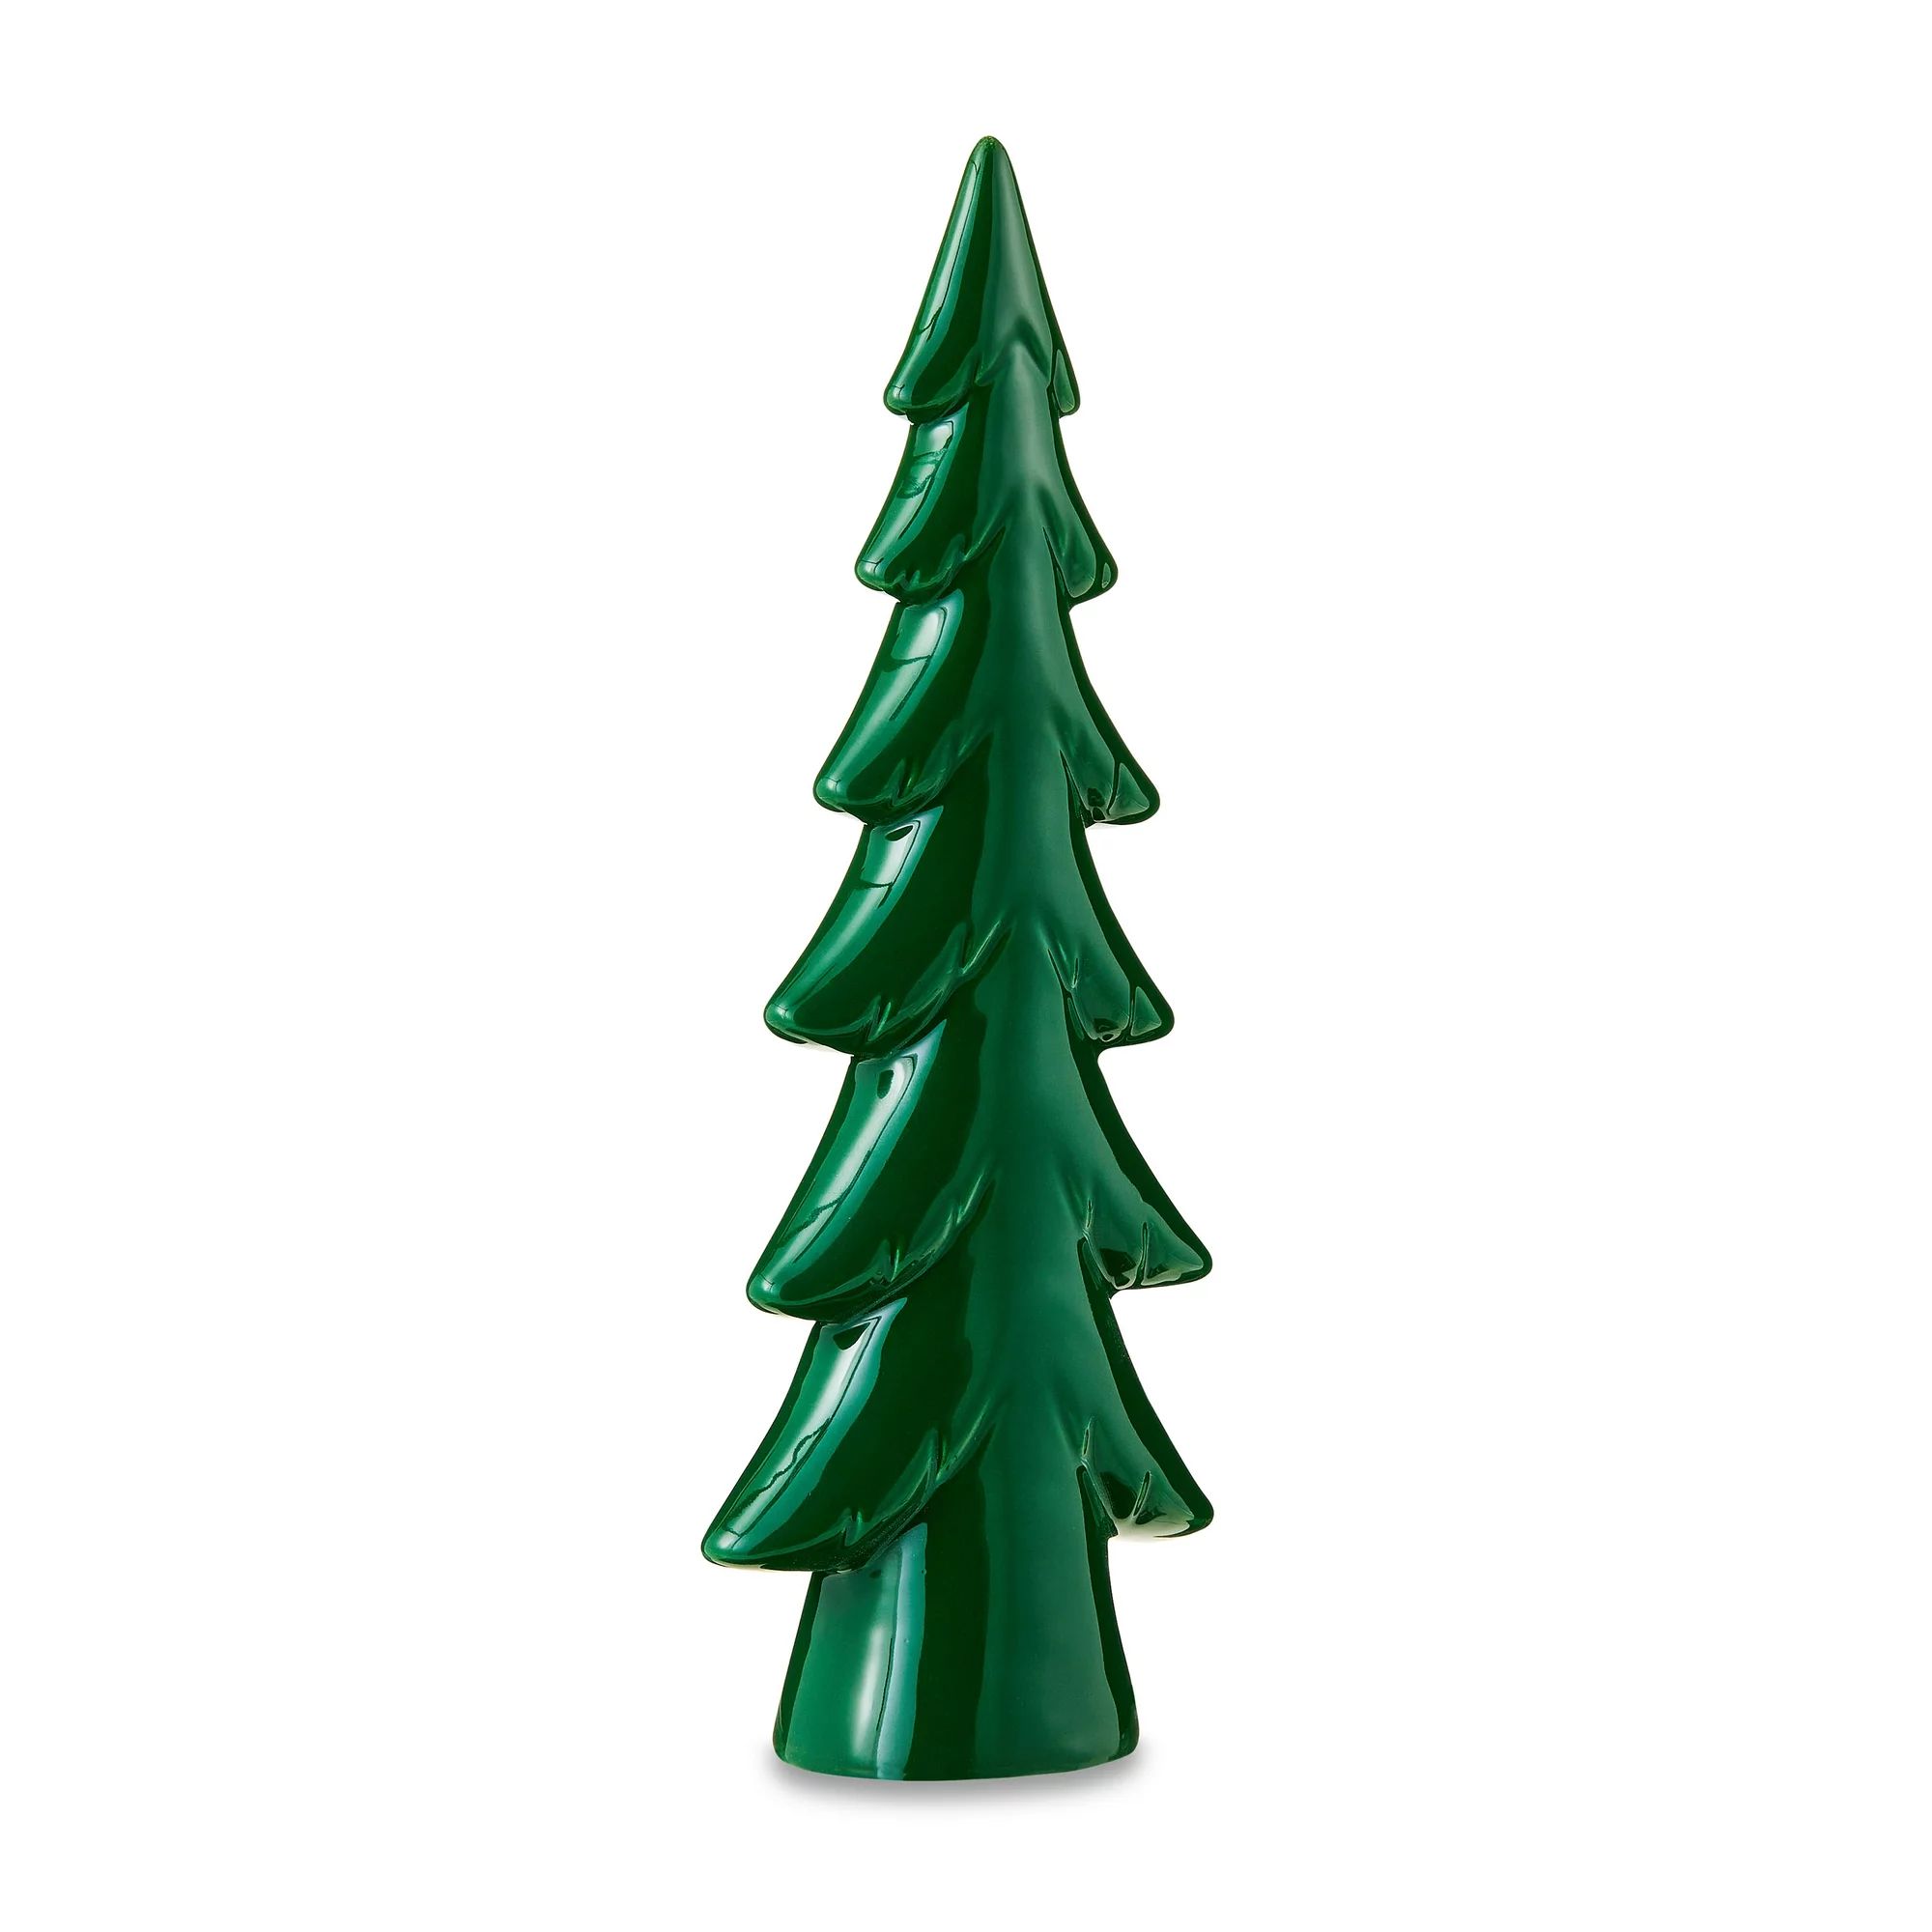 Green Ceramic Christmas Tree Tabletop Decor, 8.25 in, by Holiday Time | Walmart (US)